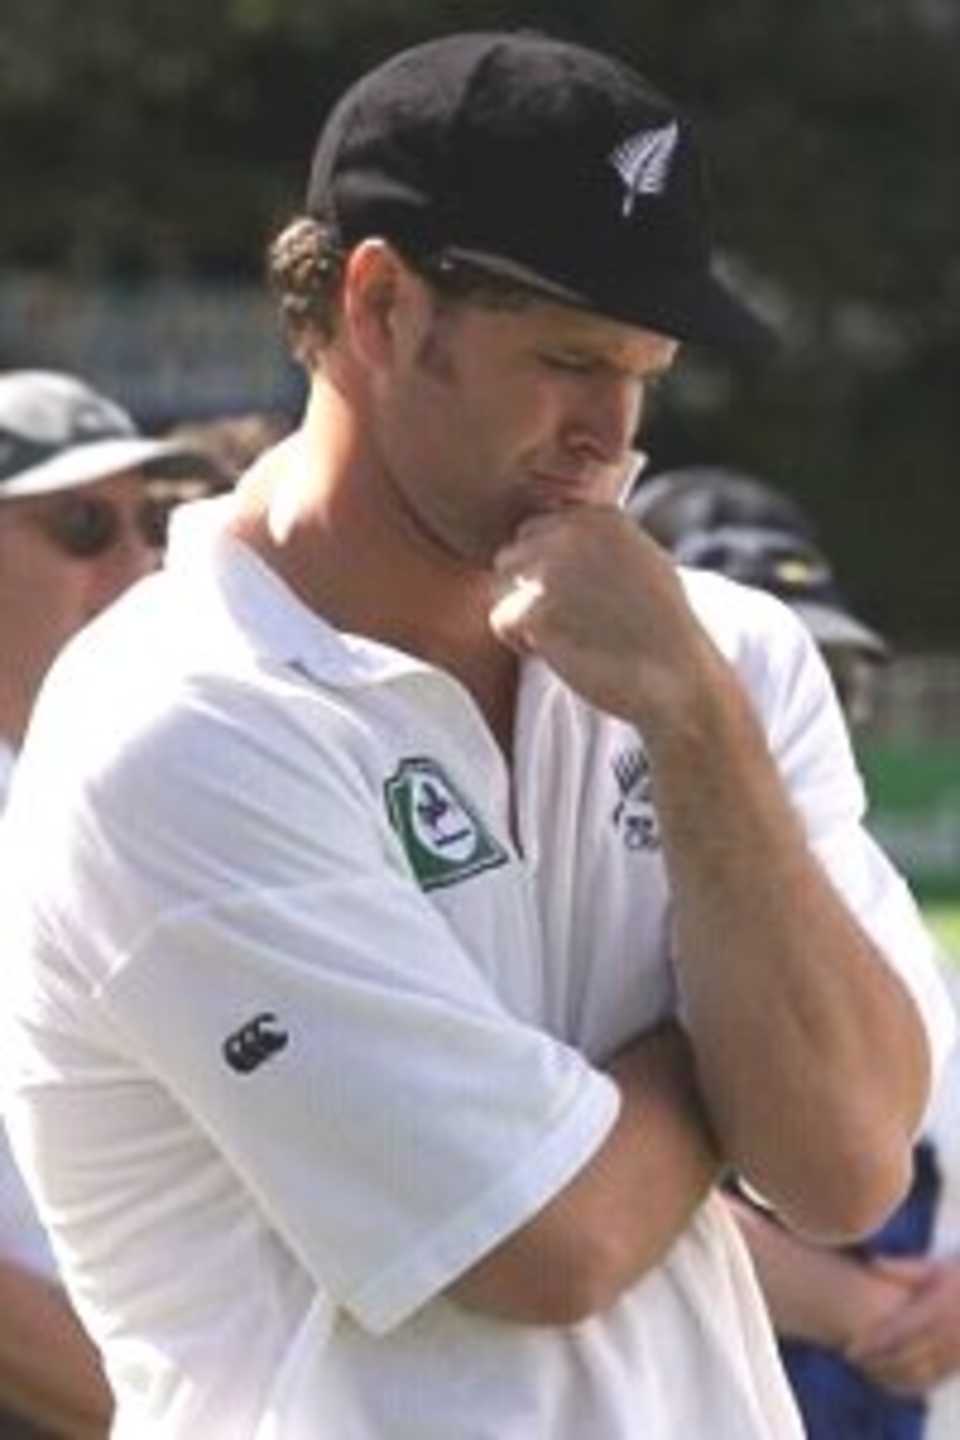 03 Apr 2000: Chris Cairns of New Zealand contemplates his teams loss in the after match presentations, during day four of the third test between New Zealand and Australia, at WestpacTrust Park, Hamilton, New Zealand. Australia won by six wickets, to win the series 3-0.